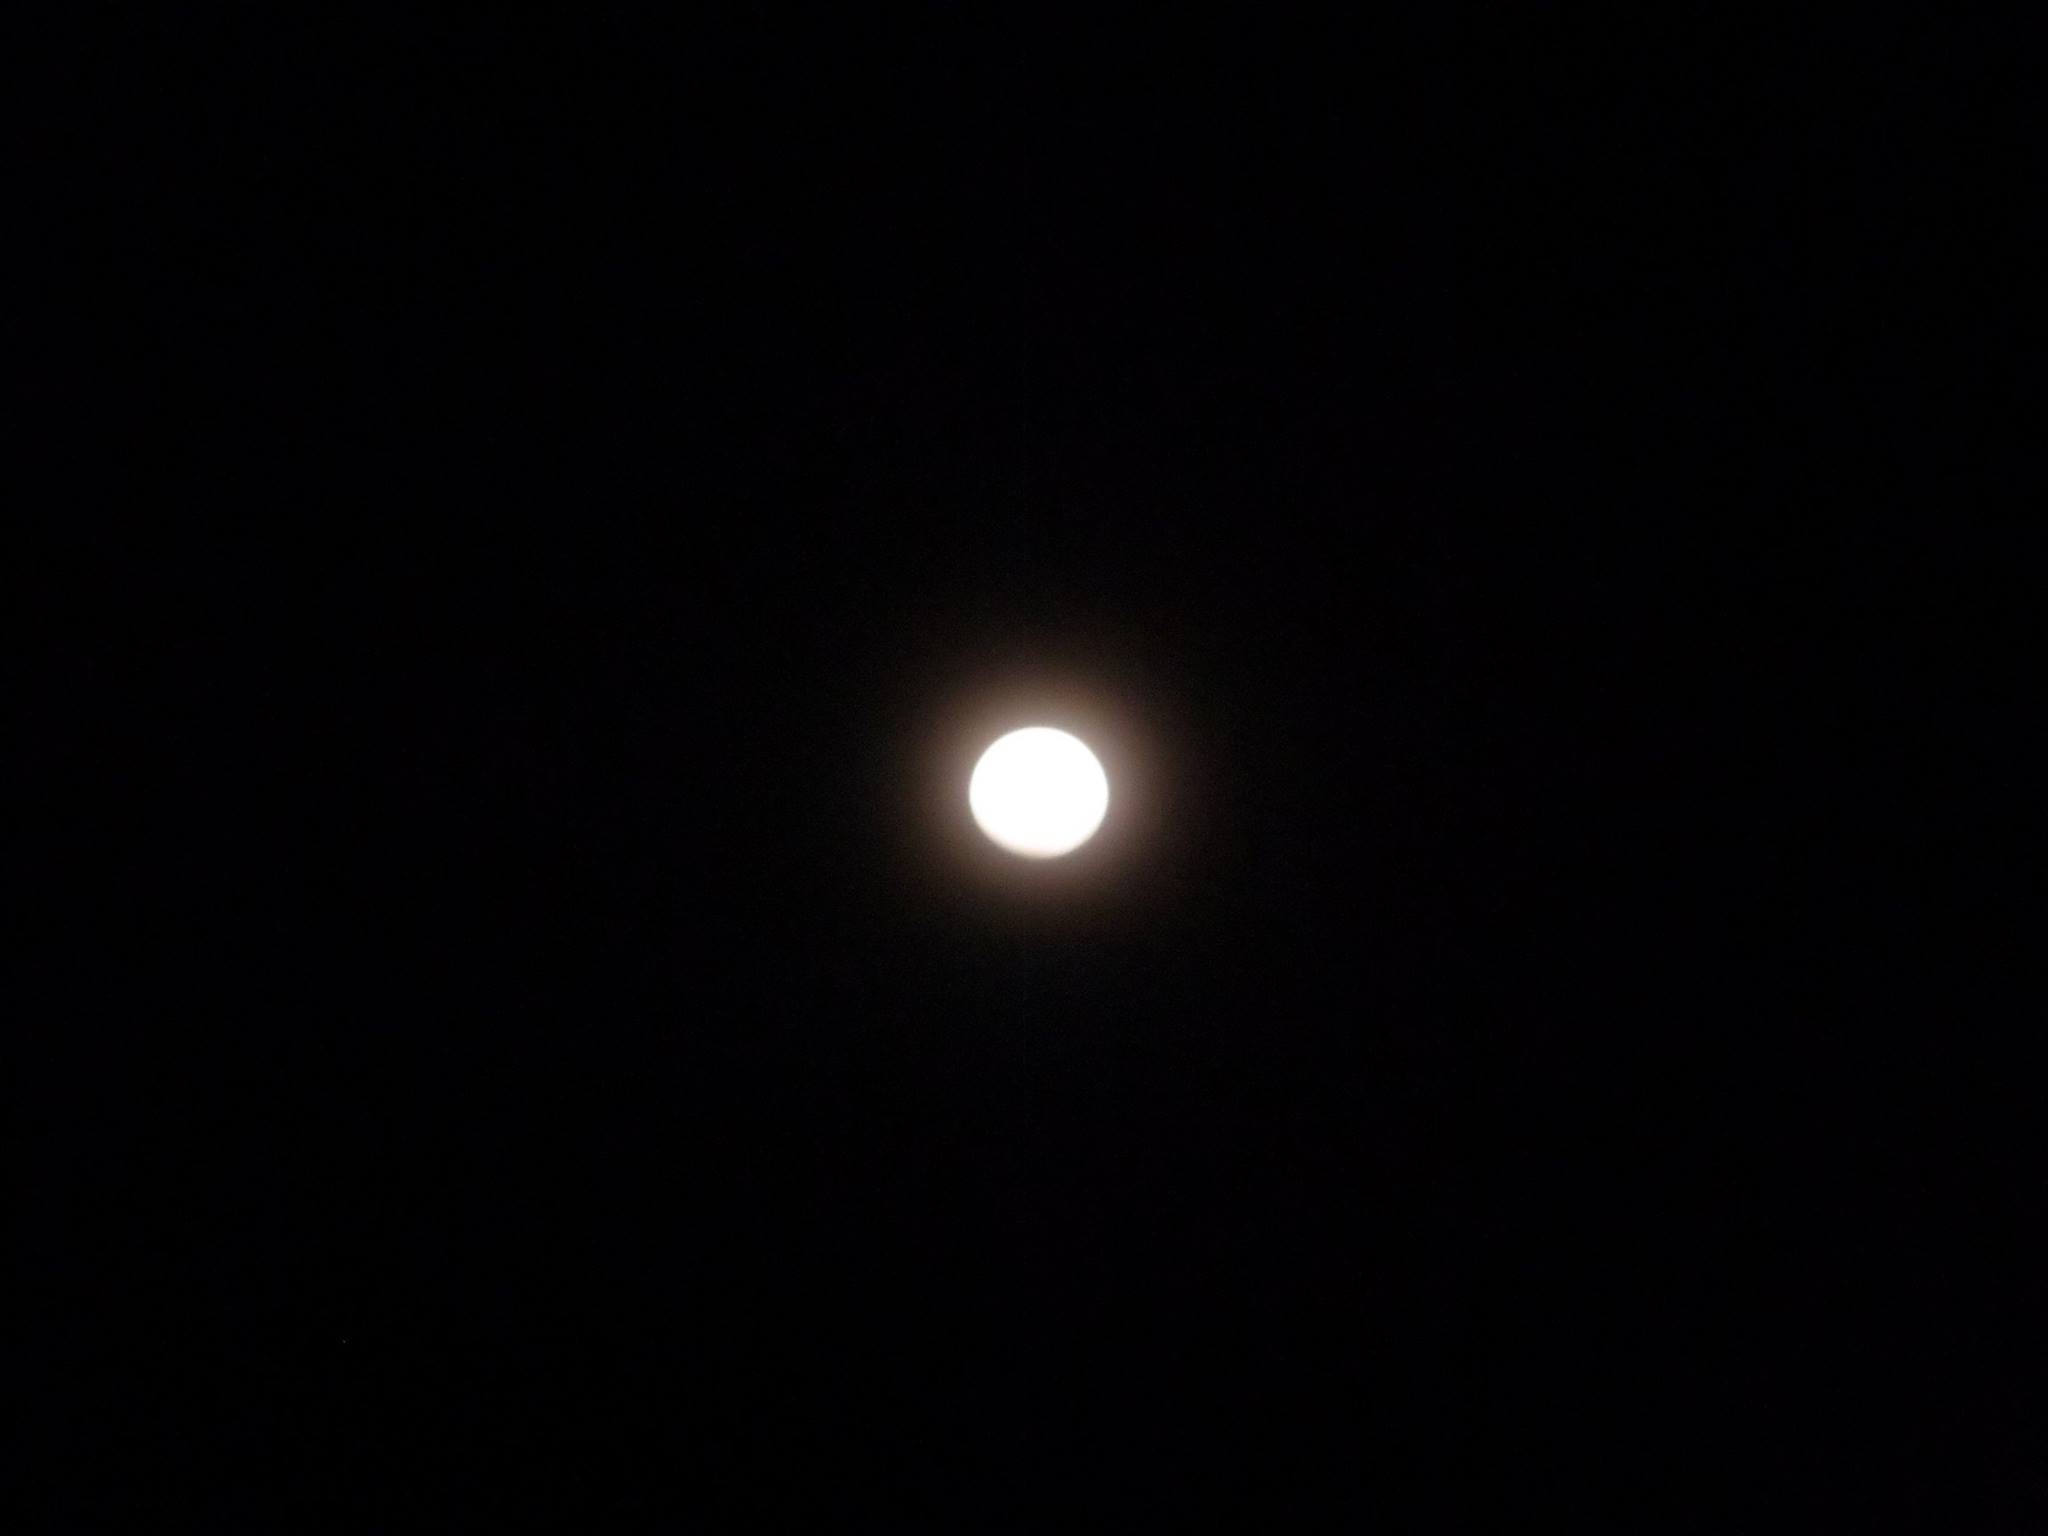 A photo I took of the moon at night.